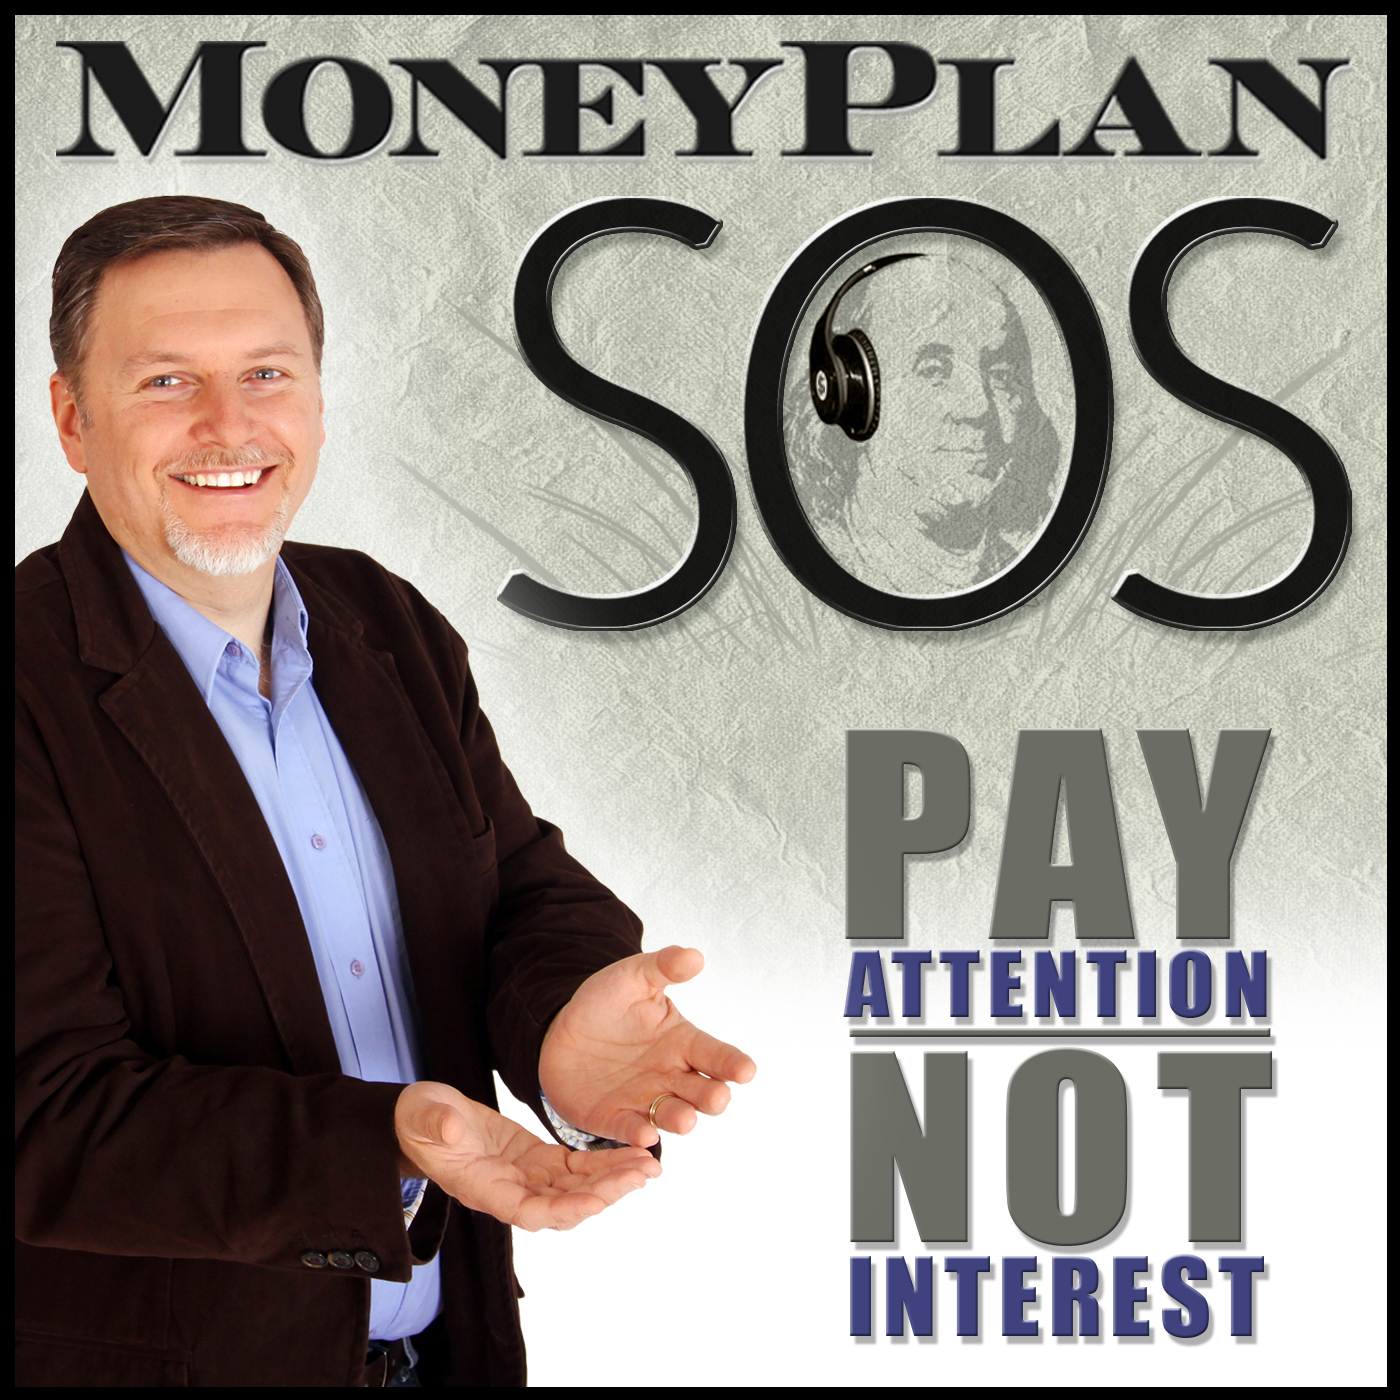 MoneyPlan SOS | Build Wealth | Get out of debt | Pay attention, not interest